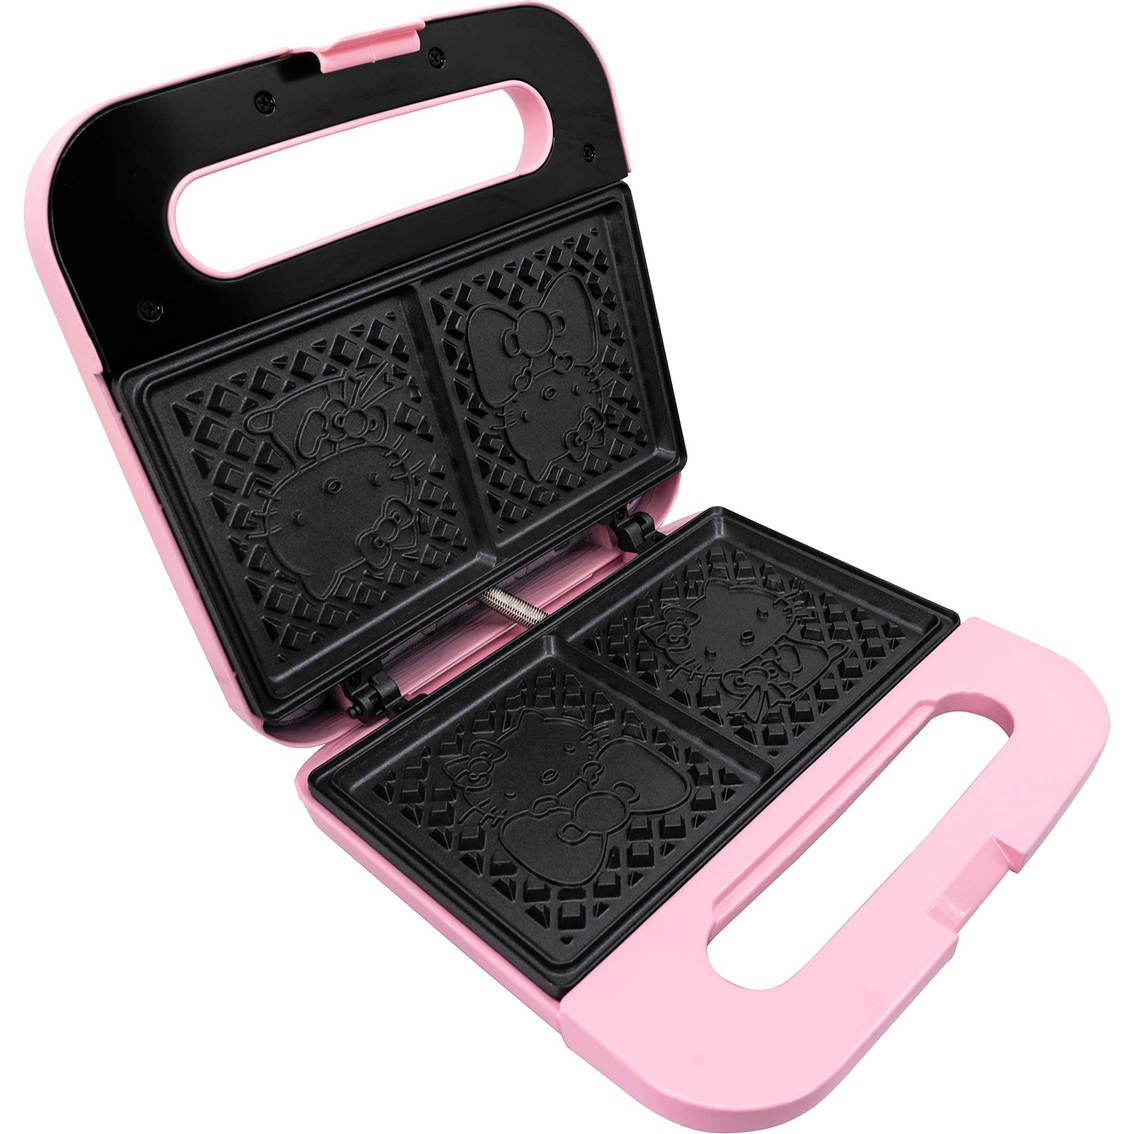 Hello Kitty Double-Square Waffle Maker - Image 4 of 6